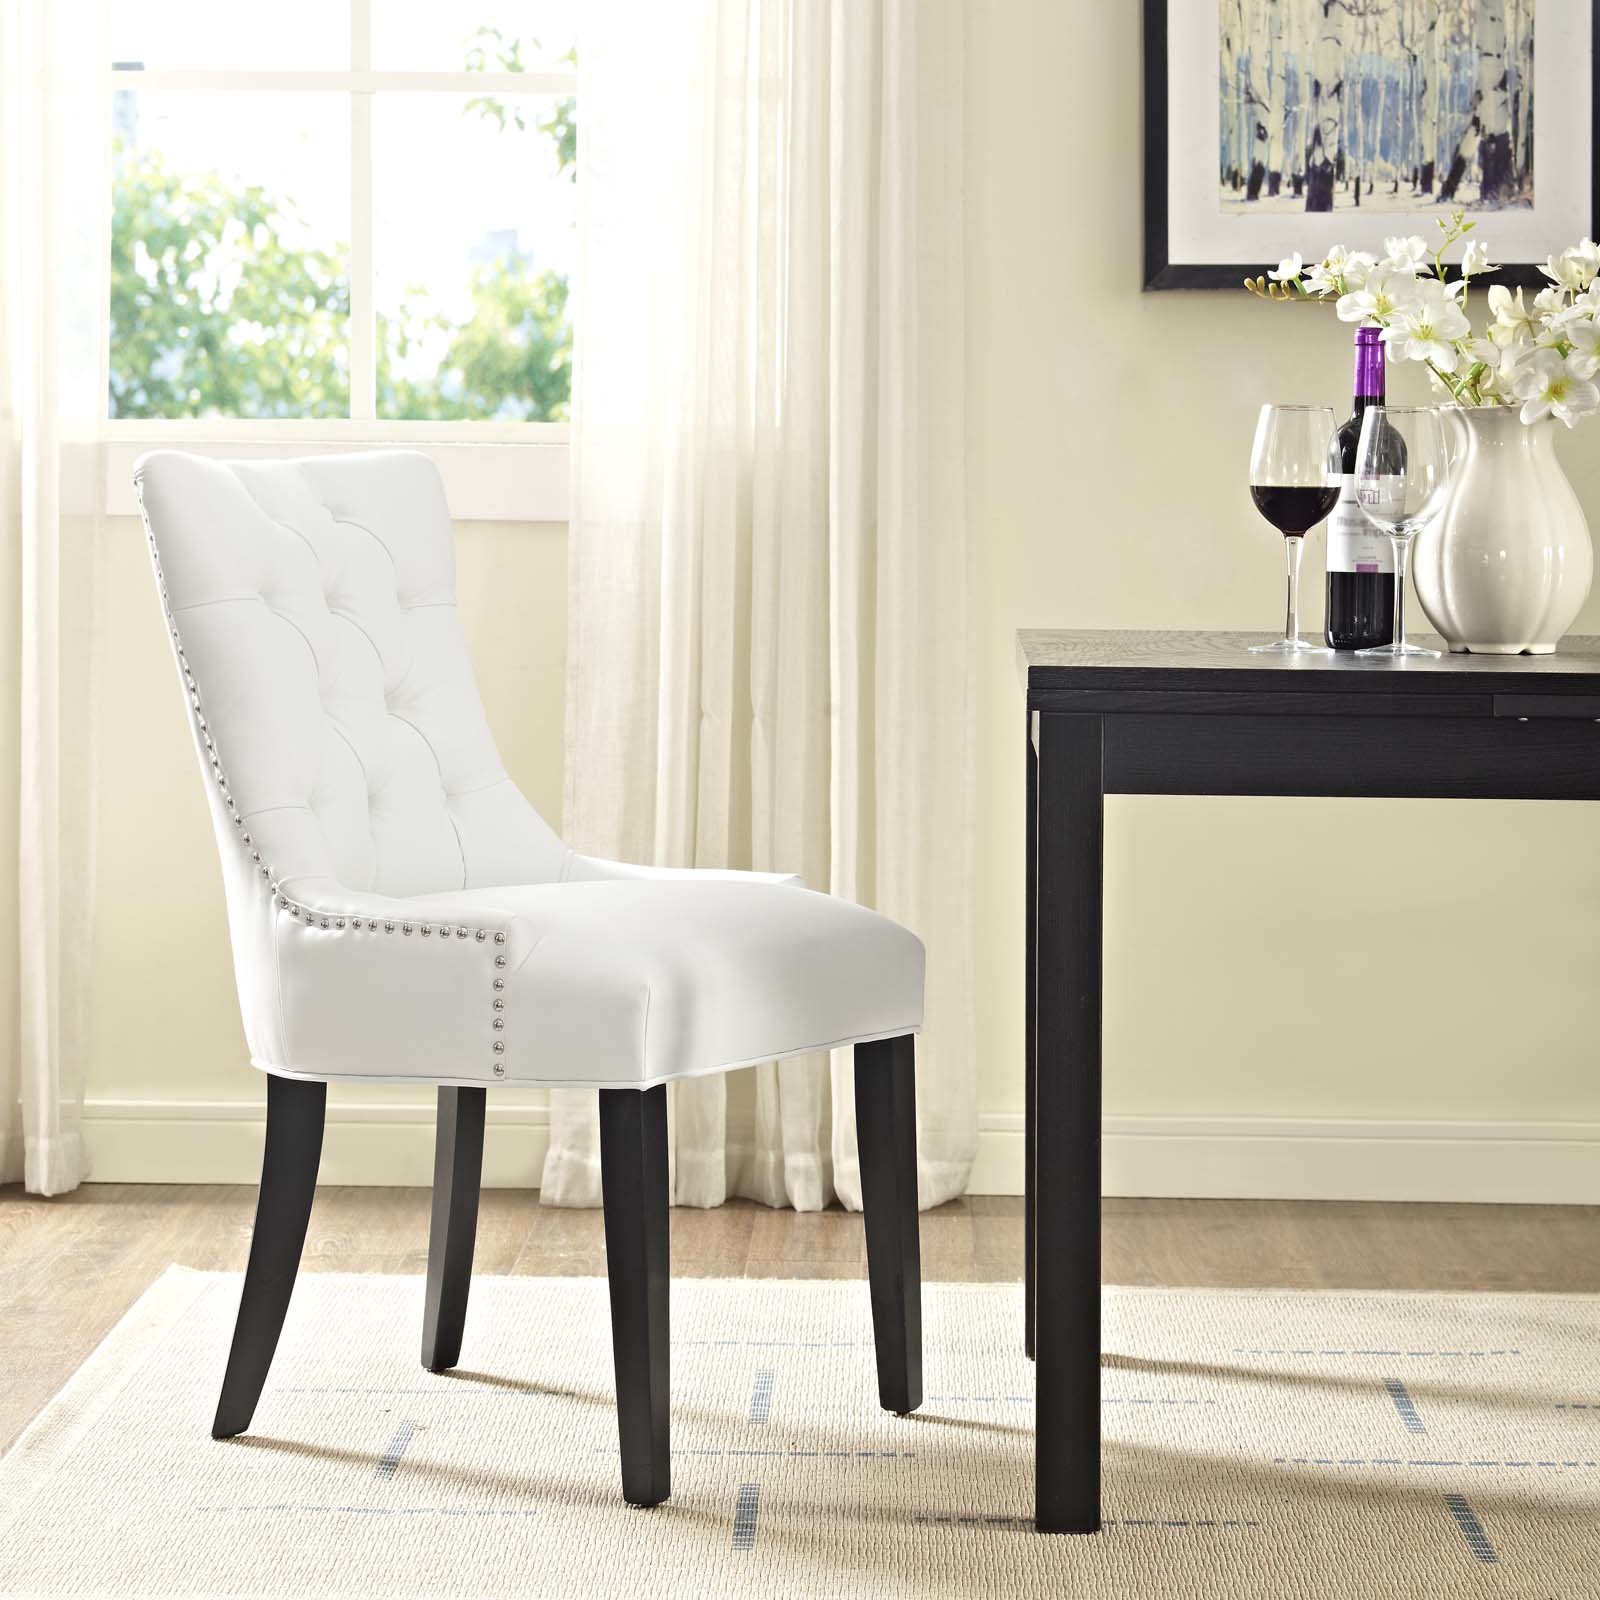 Regent Tufted Faux Leather Dining Chair In White 5f08b2846e597 